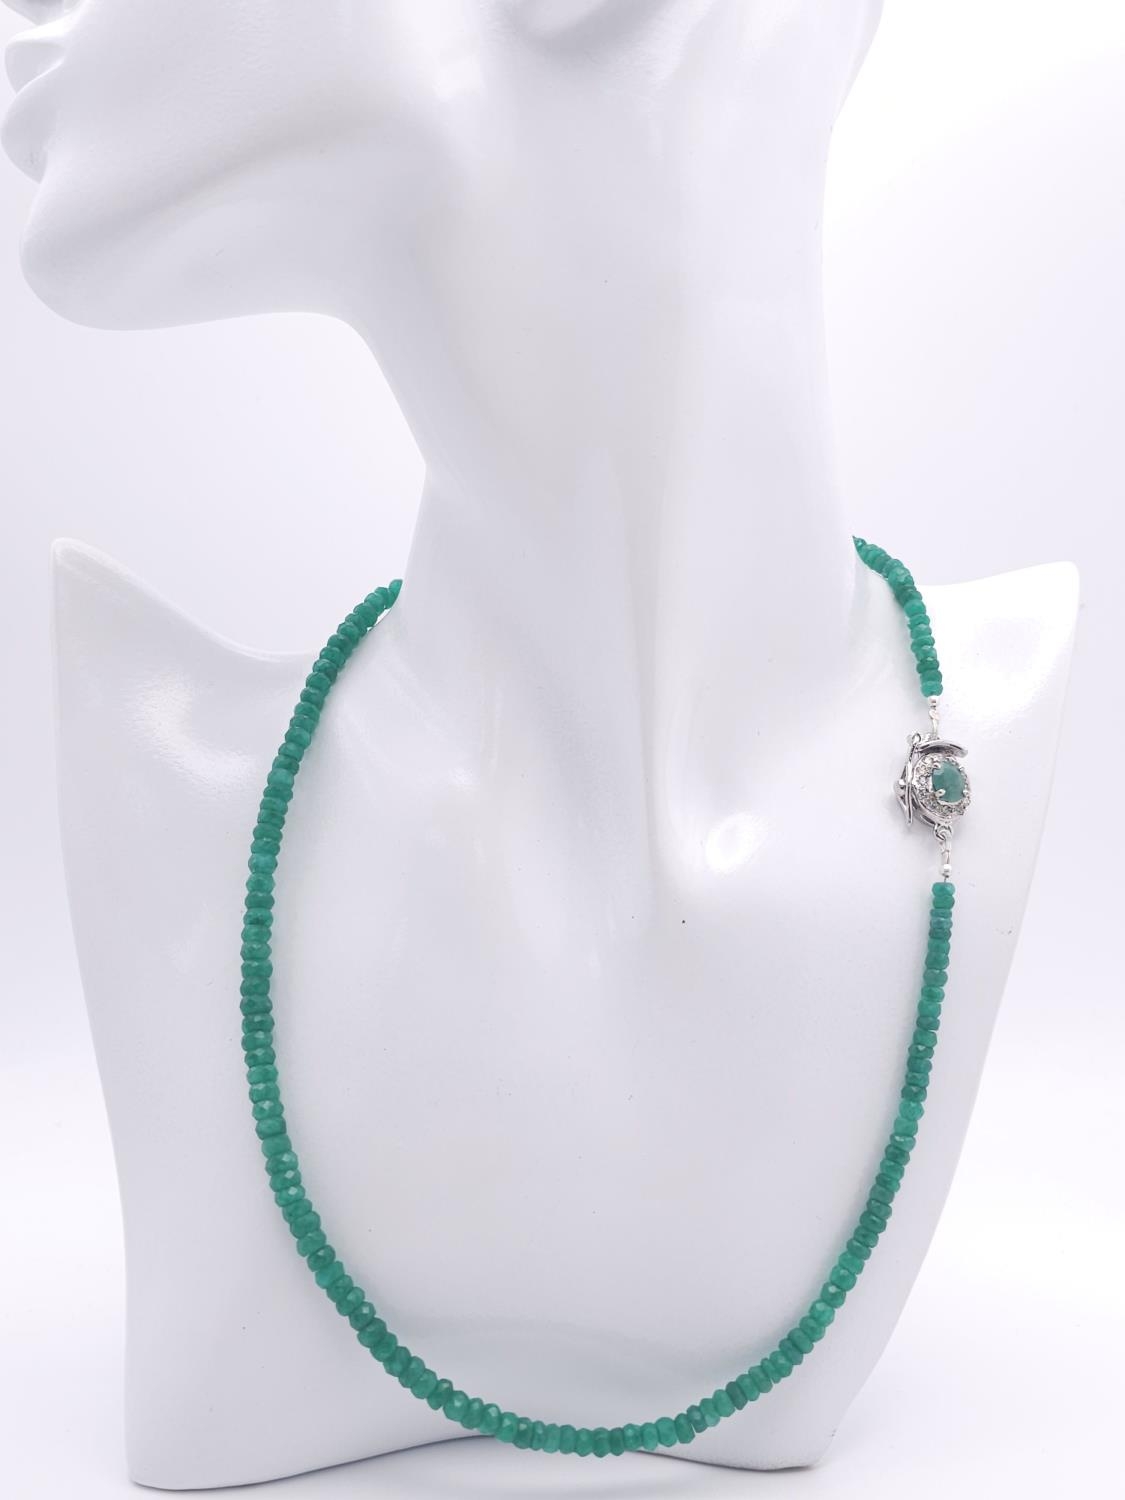 A 95ctw Emerald Gemstone Rondelle Single Strand Necklace - with Emerald and 925 Silver clasp. - Image 7 of 7